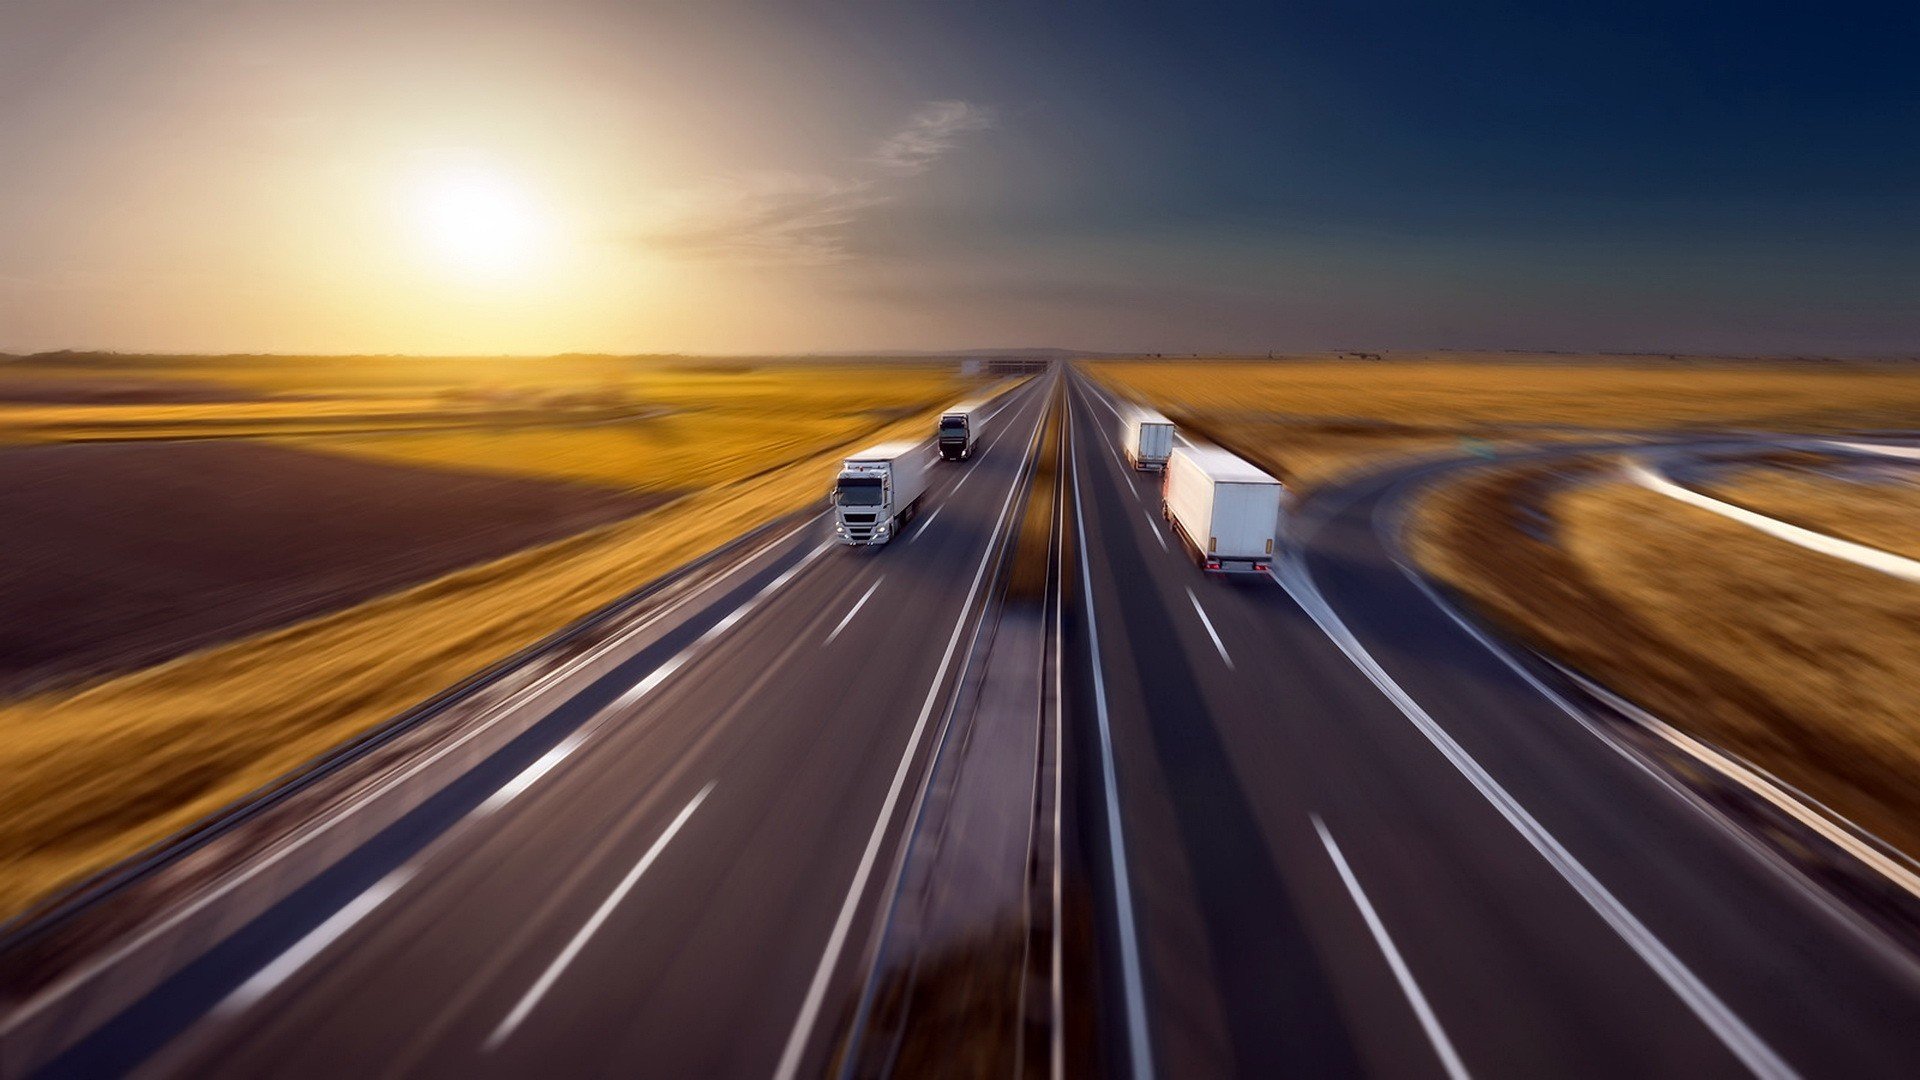 trucks, Road, Motion blur Wallpapers HD / Desktop and Mobile Backgrounds